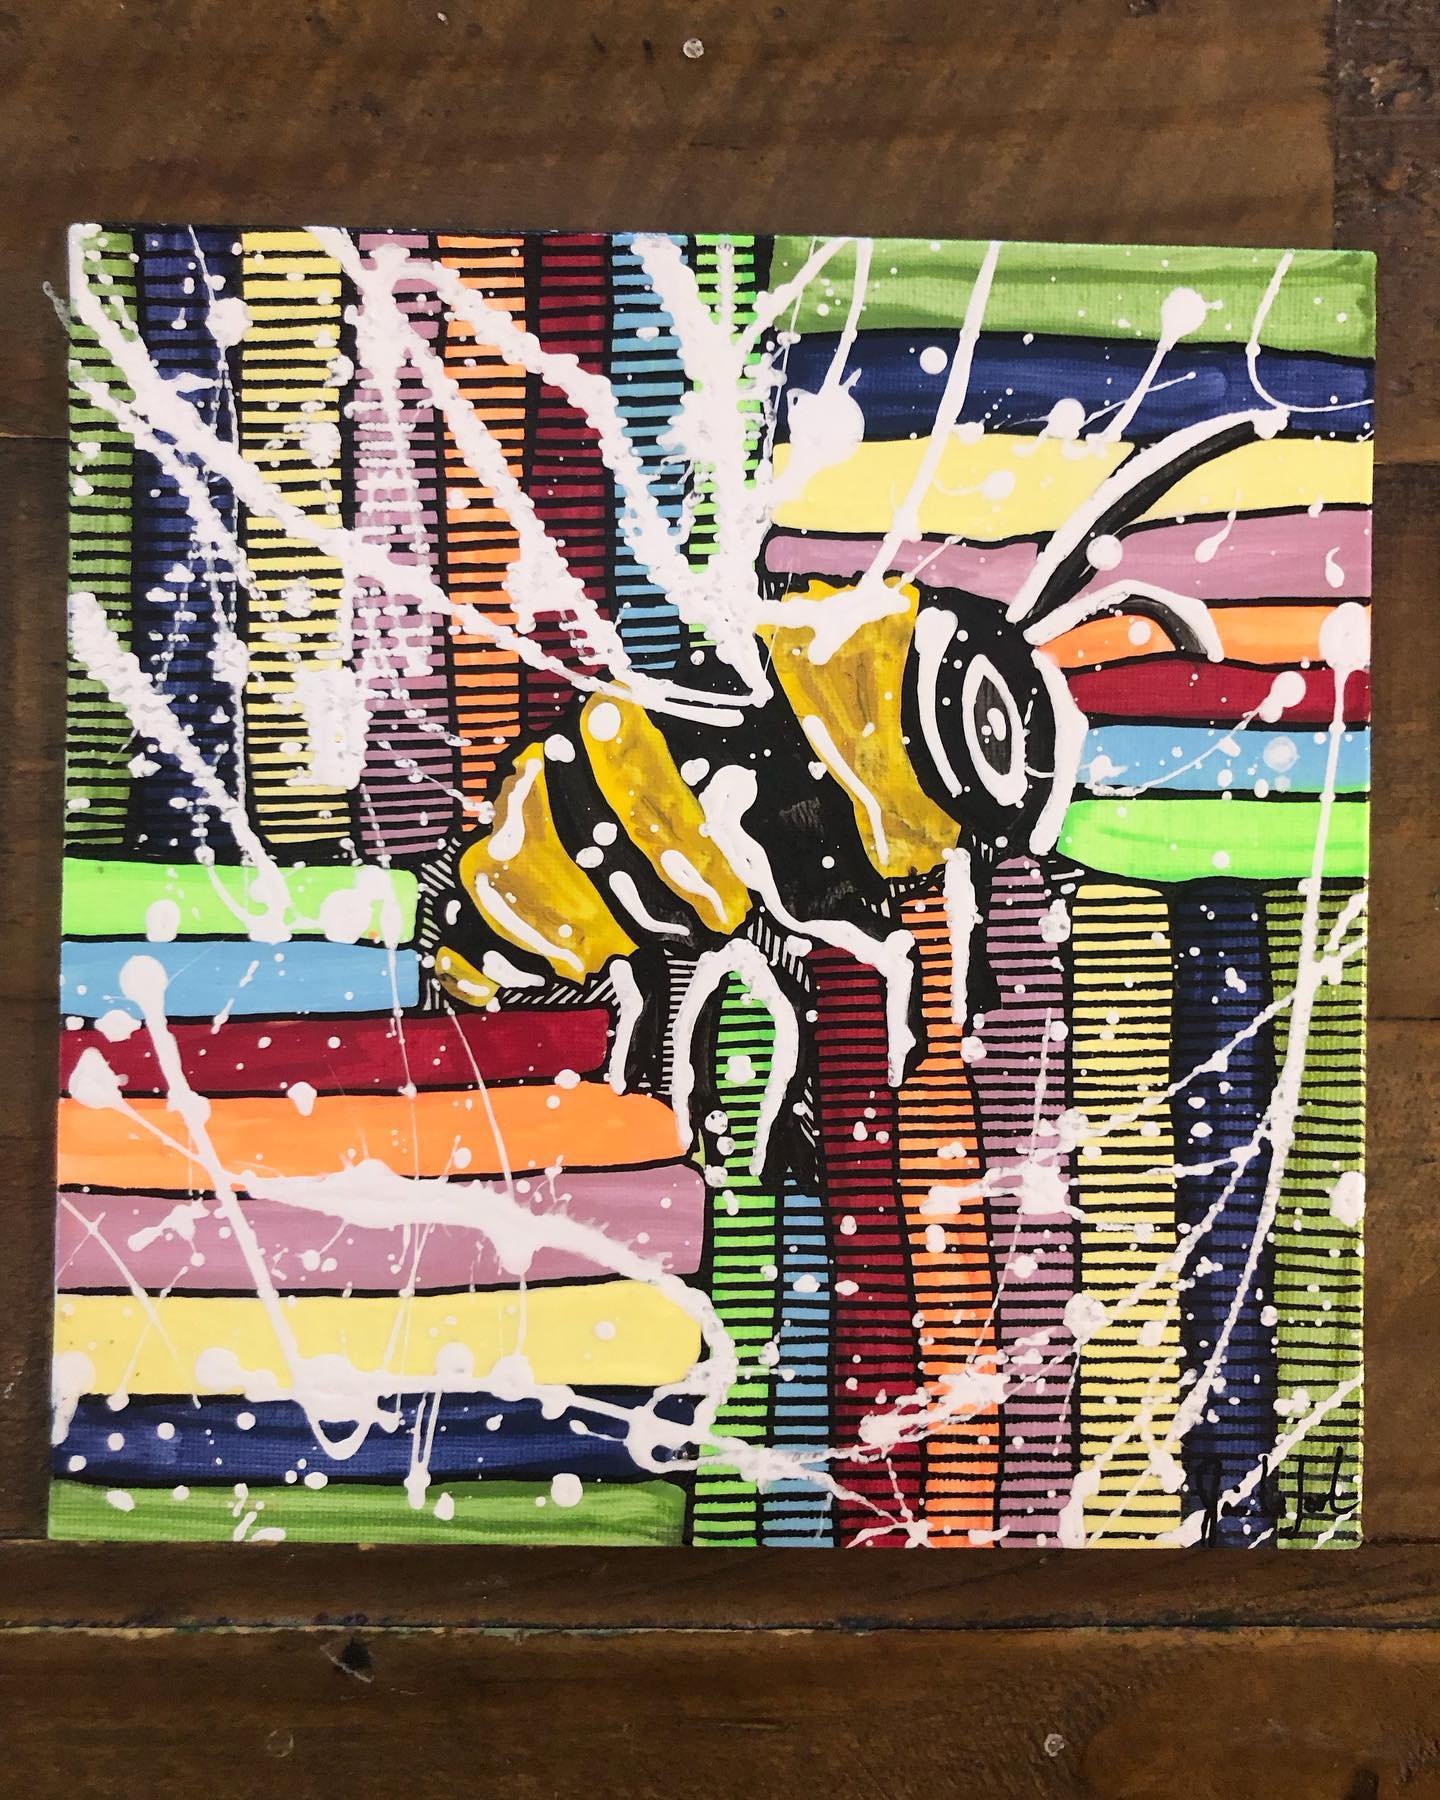 &ldquo;Busy Bee&rdquo;
8x8

And isn&rsquo;t she busy! 😊🐝

This was fun! I was worried I went a little too far, and I wasn&rsquo;t feeling the lines at first, butI think she turned out alright. Again, great practice run for my journey into painting 